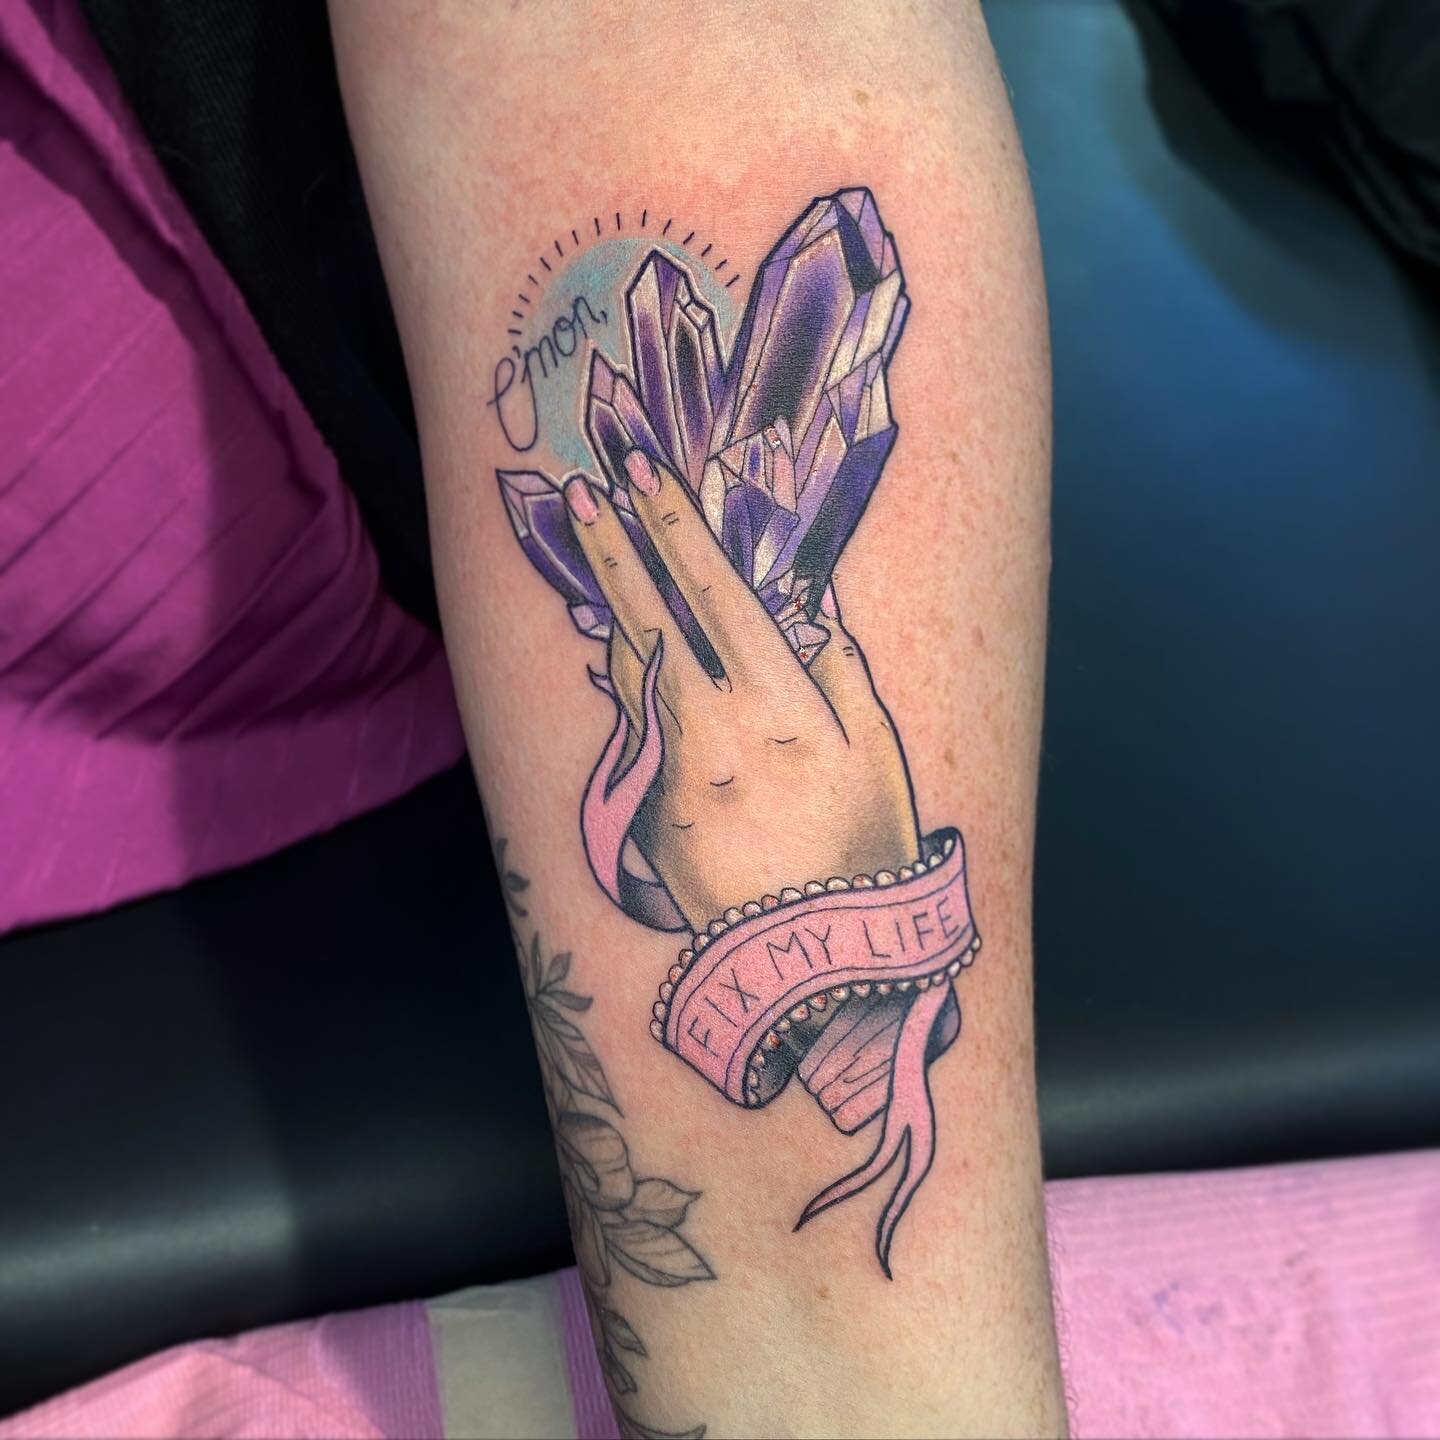 💜Fix My Life amethyst for Mollie!💜 Thanks again for snapping up this design! Can&rsquo;t wait for the next one ❤️ @stencil.jam @kwadron @rawpigments @drmorsetattoo #tattoo #tattooartist #femaletattooartist #ladytattooer #nztattoo #wellingtontattoo 